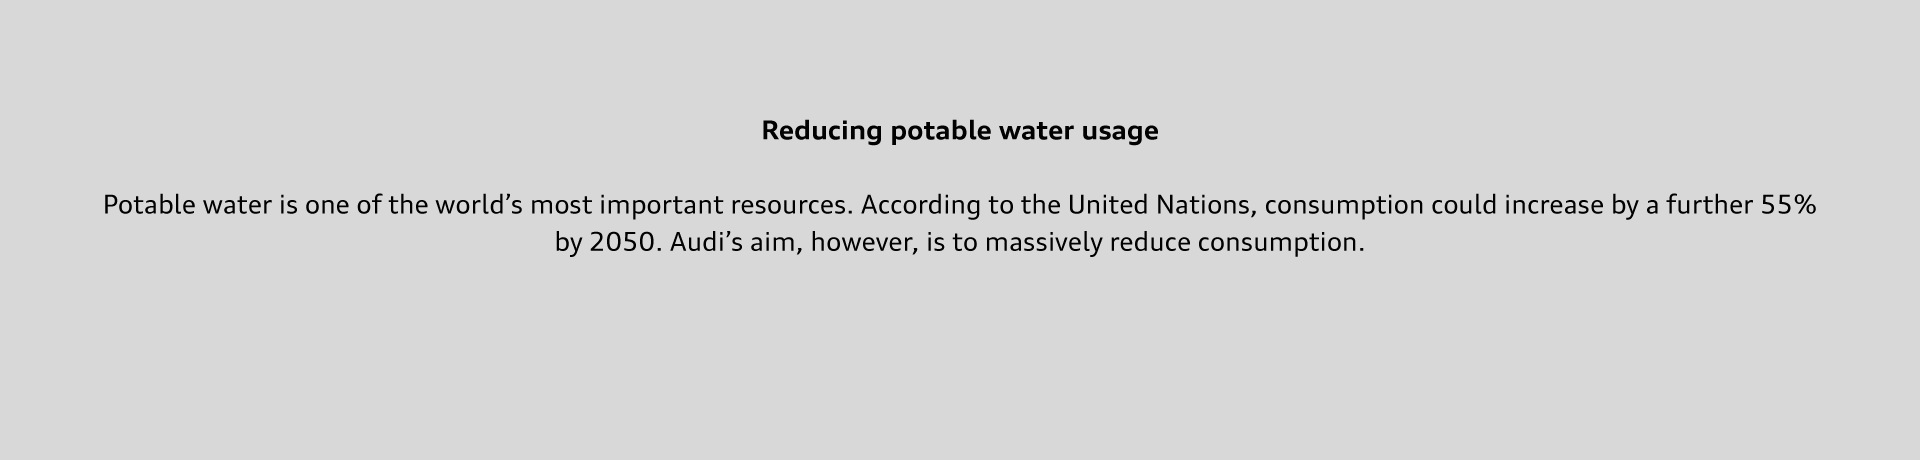 Potable water is one of the world’s most important resources. According to the United Nations, consumption could increase by a further 55% by 2050. Audi’s aim, however, is to massively reduce consumption.